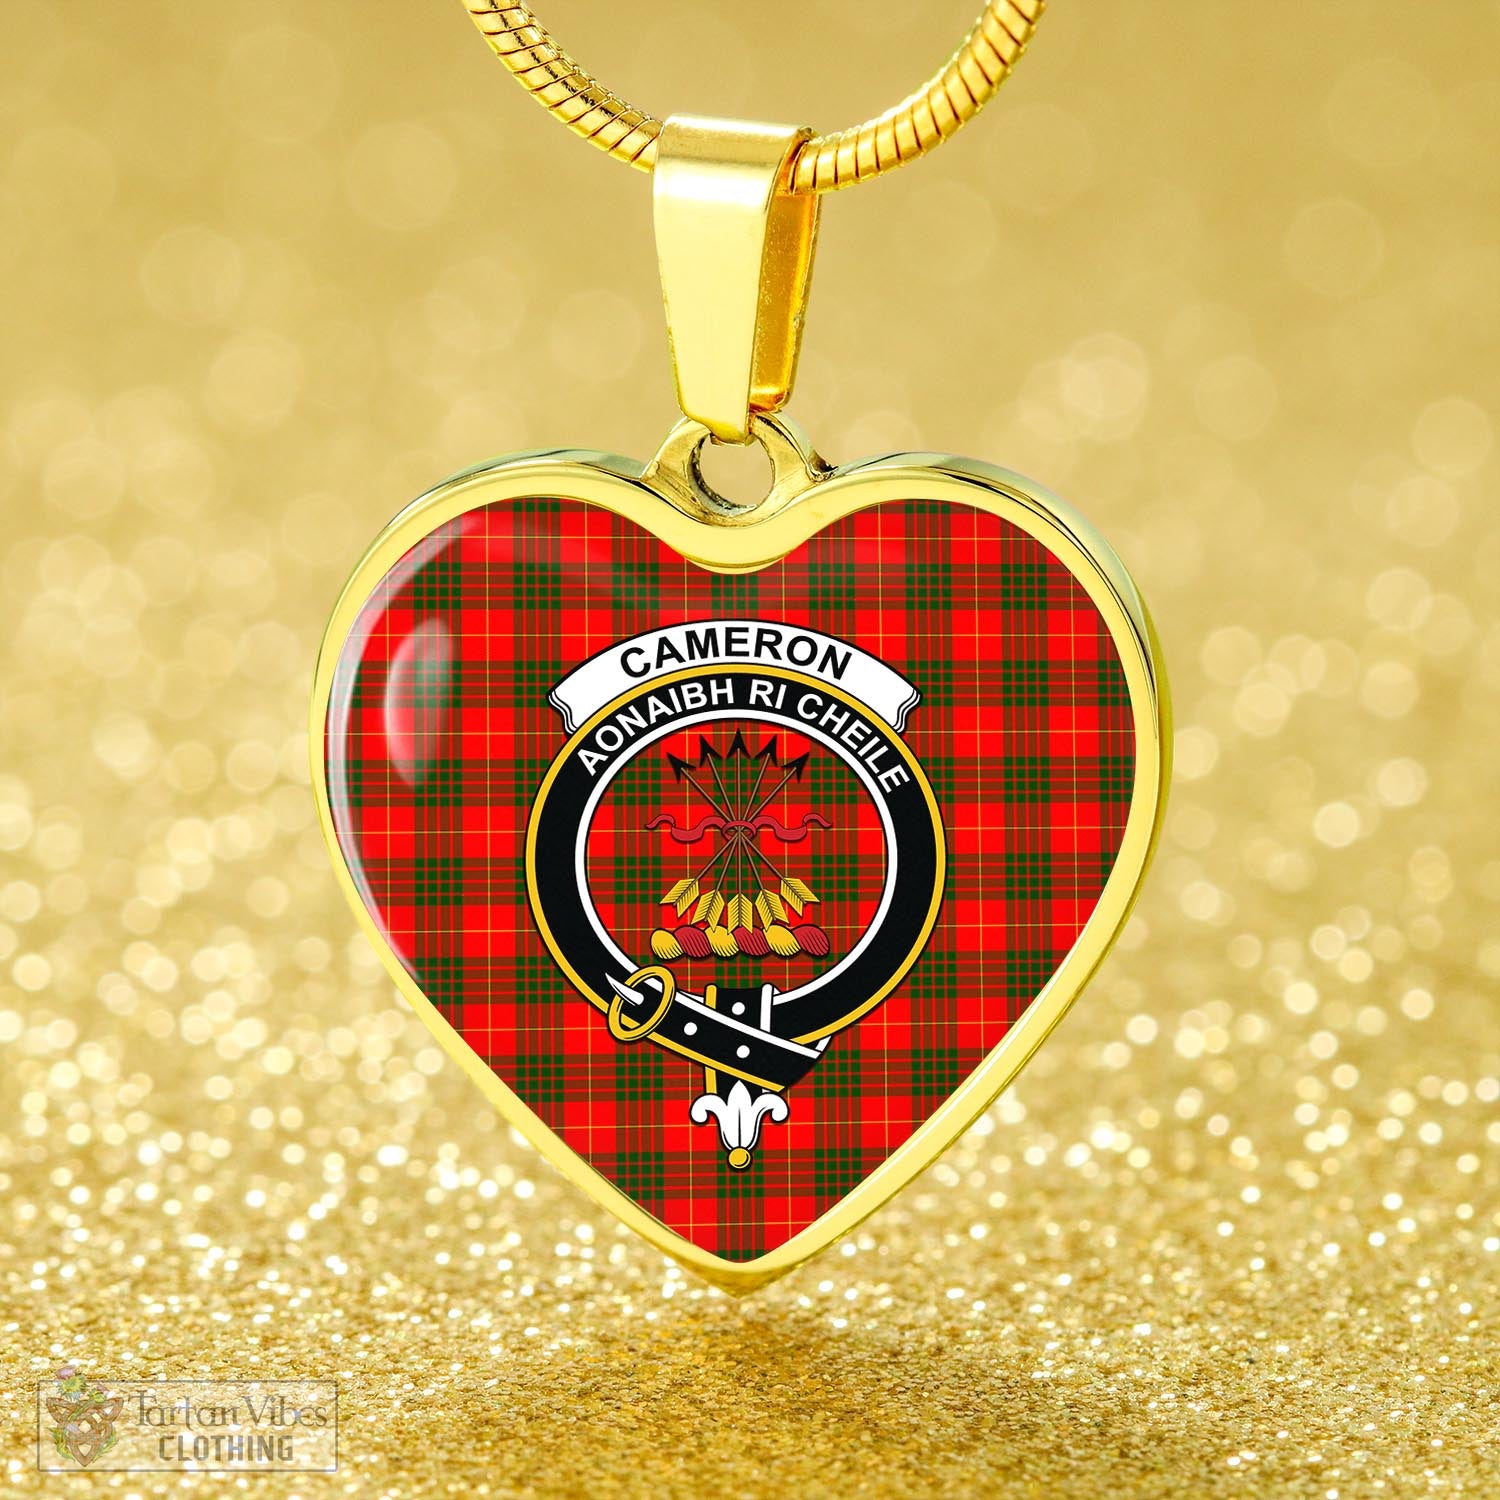 Tartan Vibes Clothing Cameron Modern Tartan Heart Necklace with Family Crest